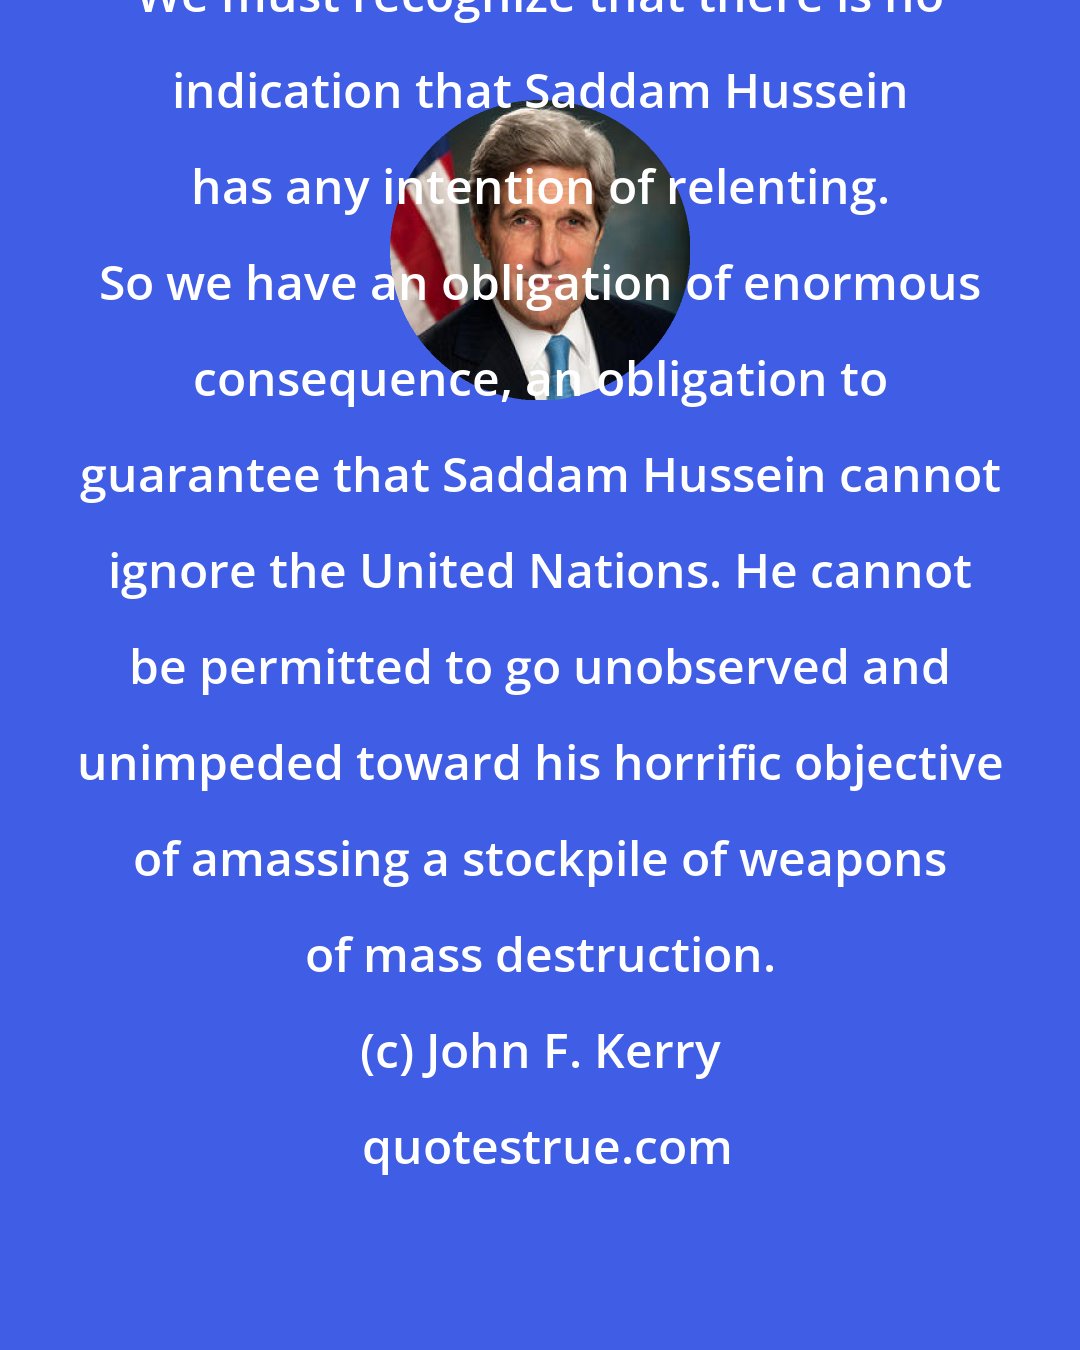 John F. Kerry: We must recognize that there is no indication that Saddam Hussein has any intention of relenting. So we have an obligation of enormous consequence, an obligation to guarantee that Saddam Hussein cannot ignore the United Nations. He cannot be permitted to go unobserved and unimpeded toward his horrific objective of amassing a stockpile of weapons of mass destruction.